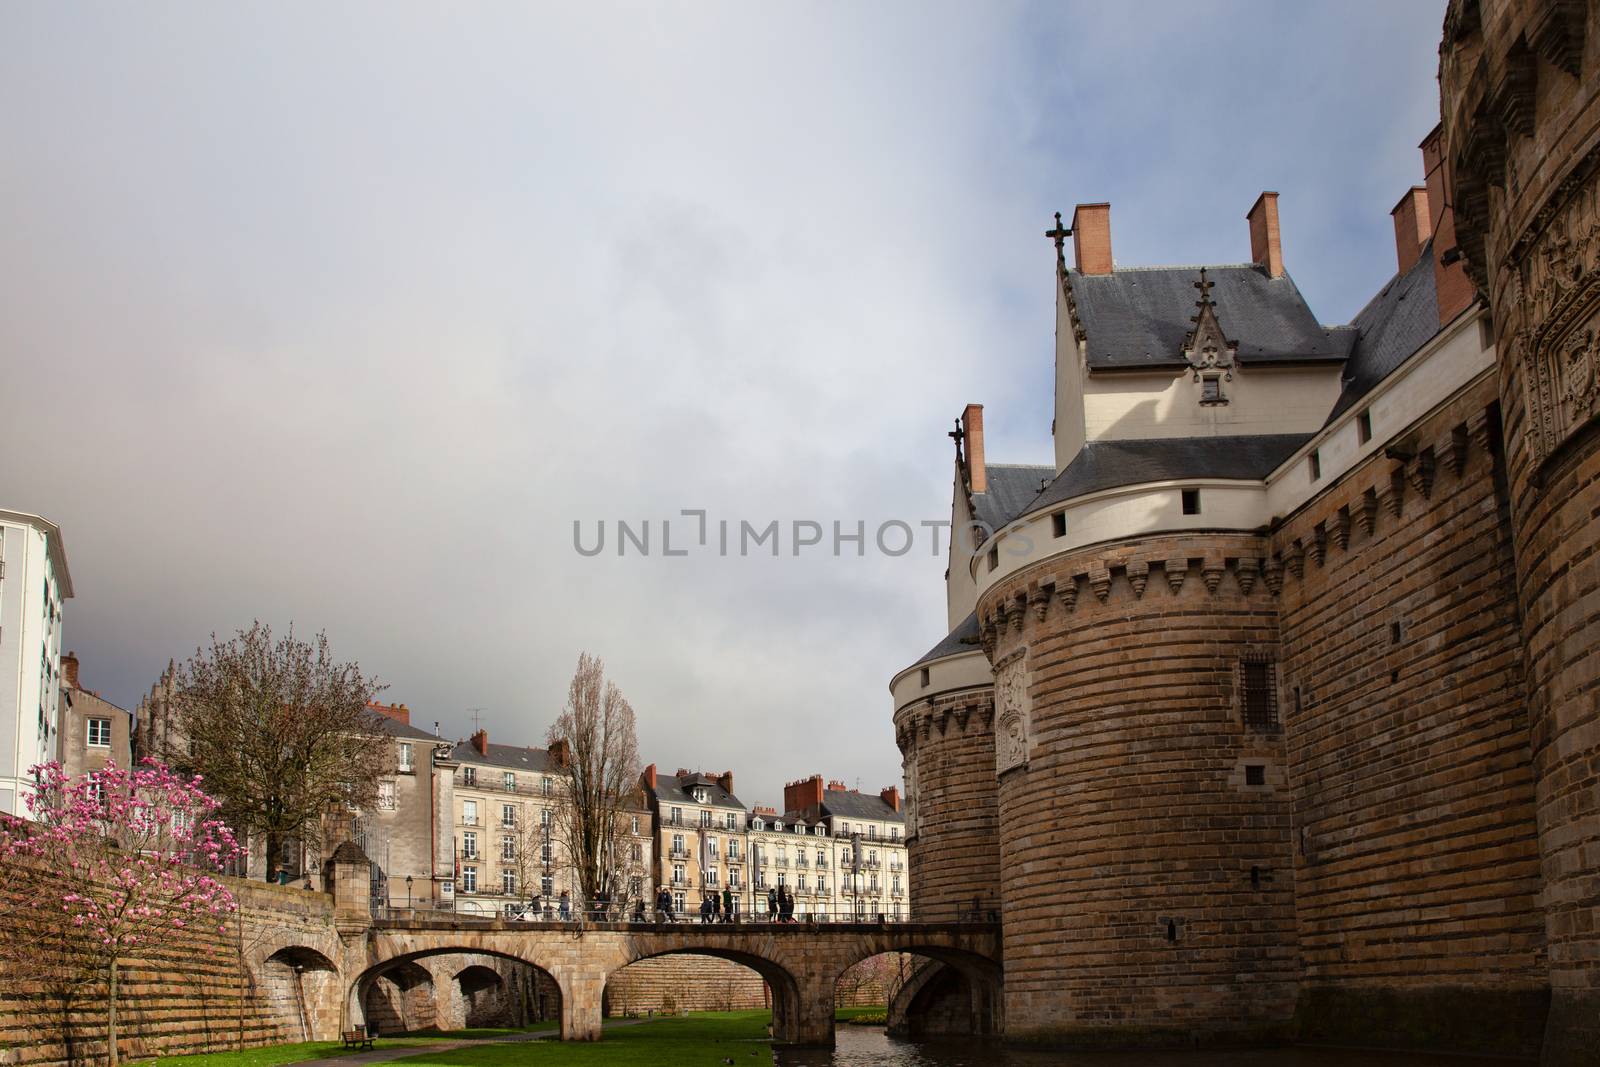 Entrance gate and bridge to Castle of the Dukes of Brittany, Nantes, France by vlad-m